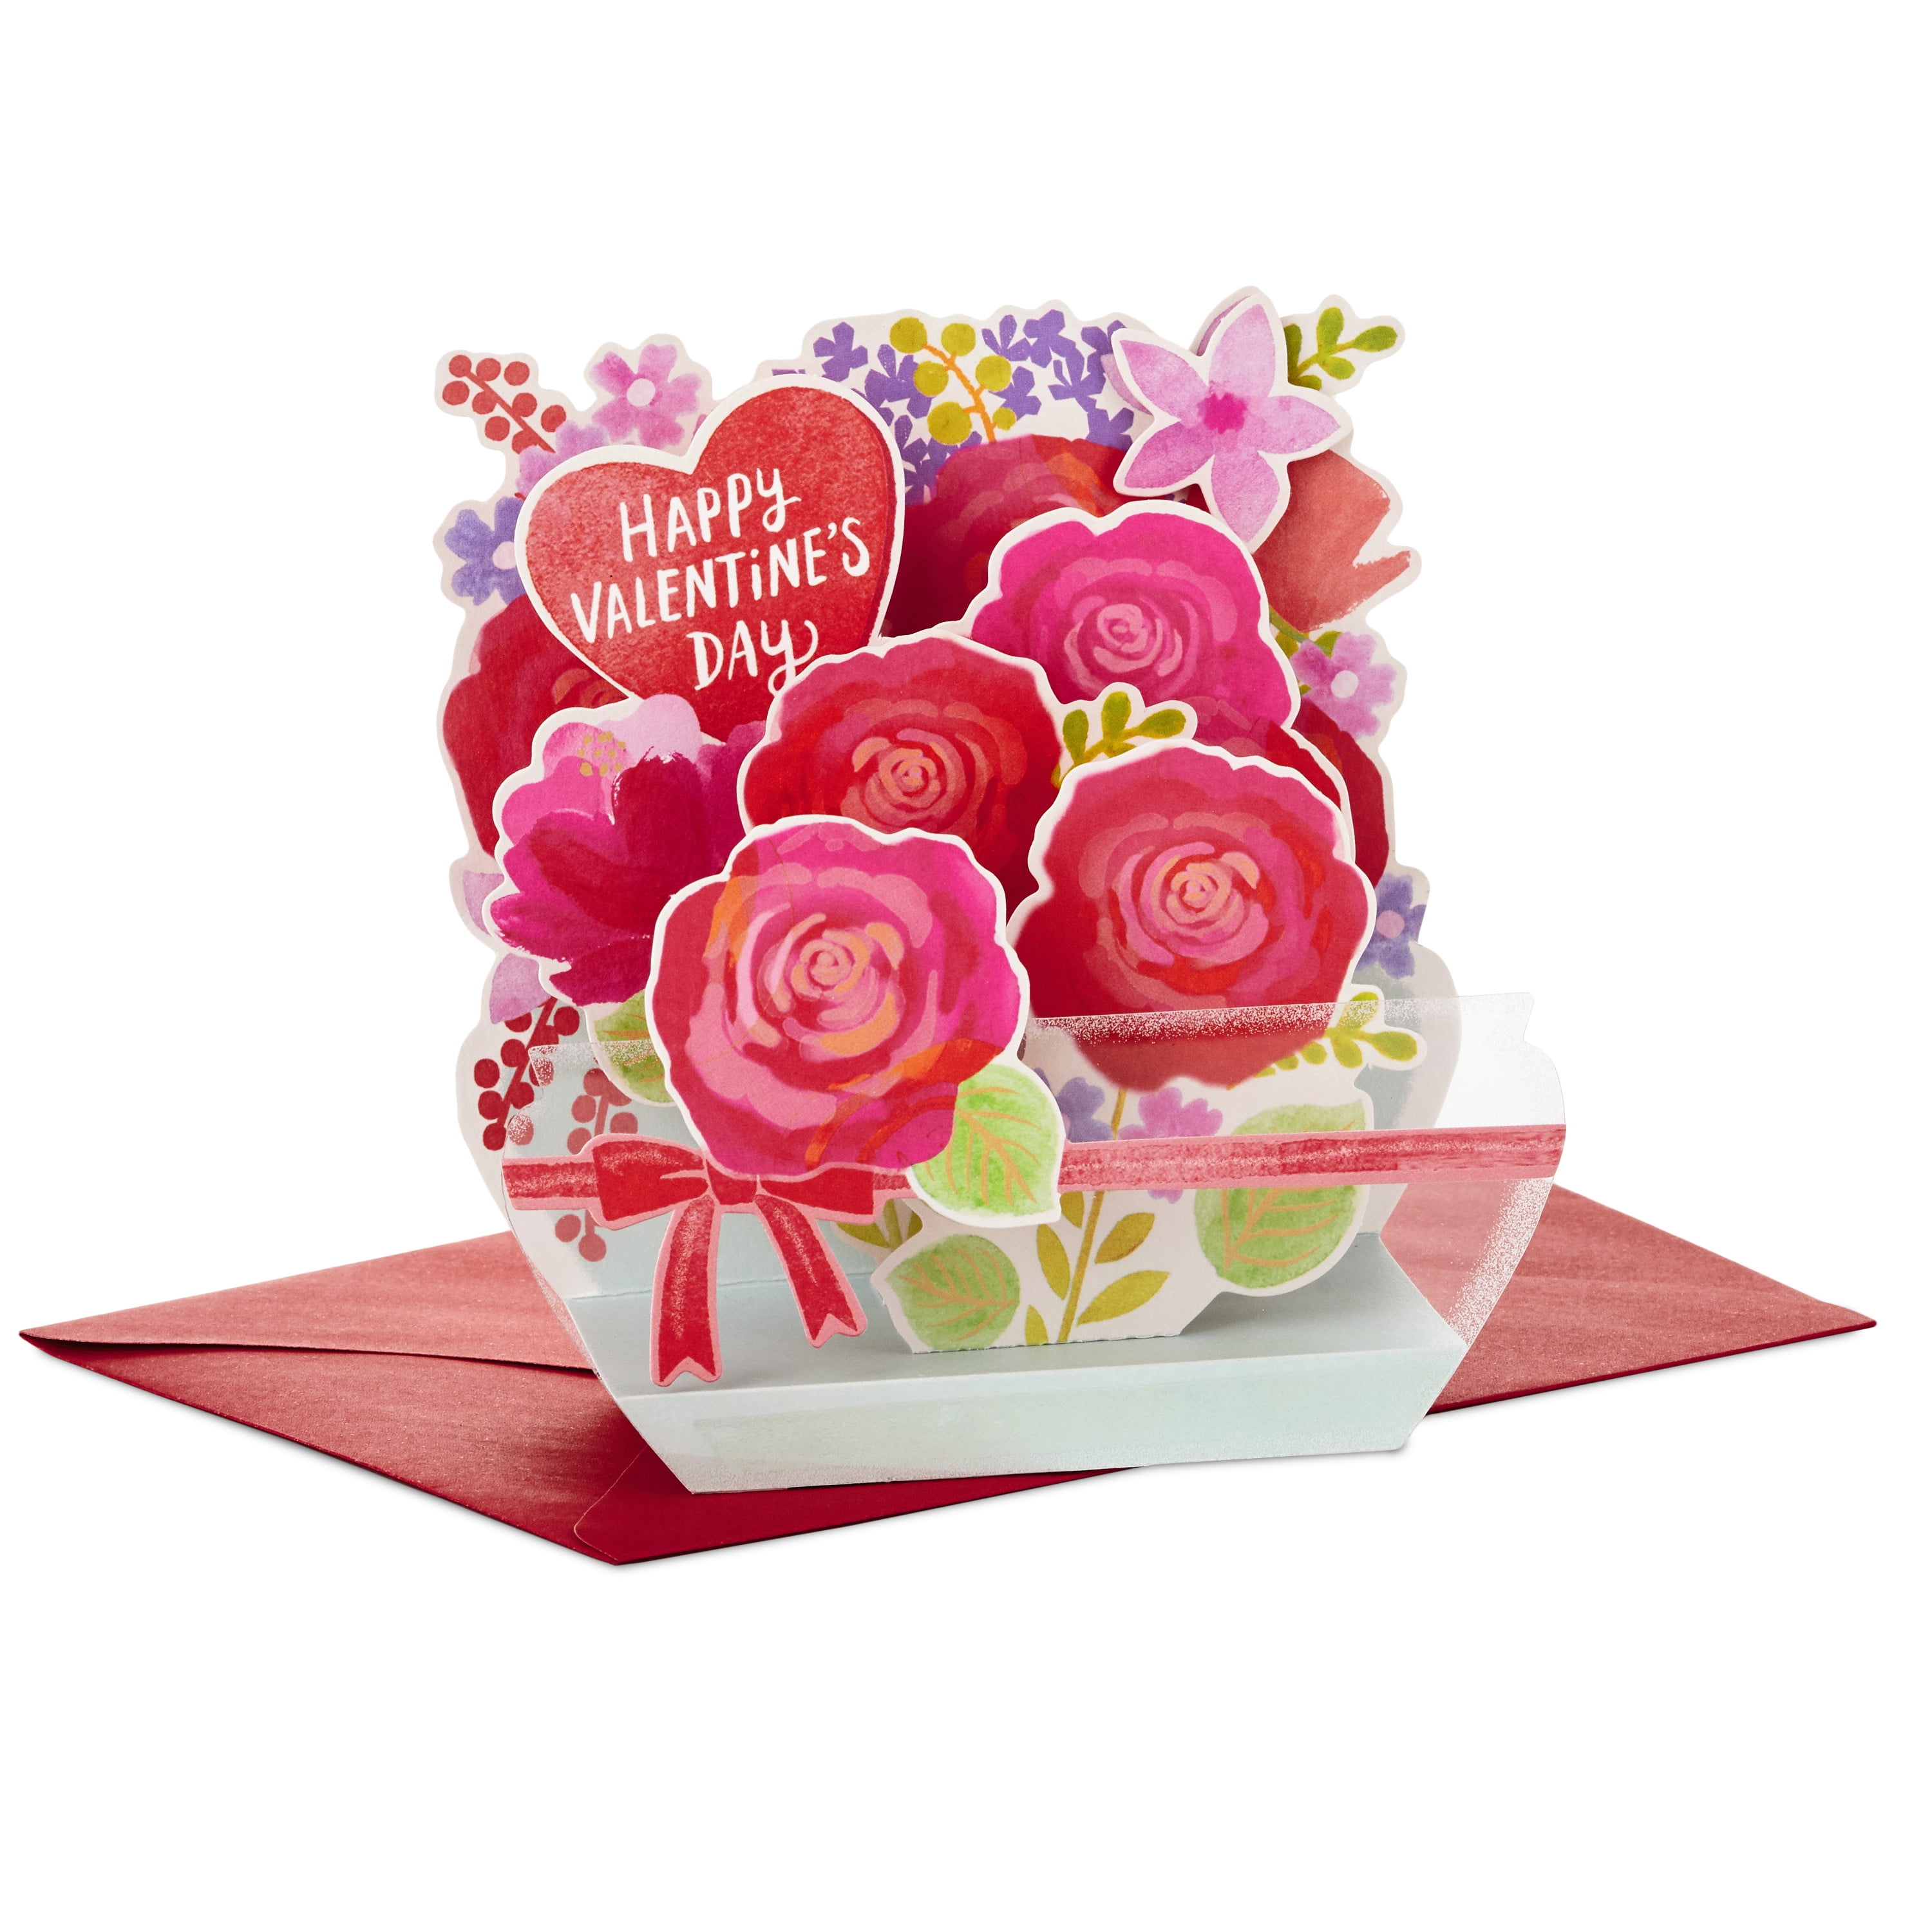 Royer 12 Inch Plastic Heart Valentine's Day Floral Picks, Card